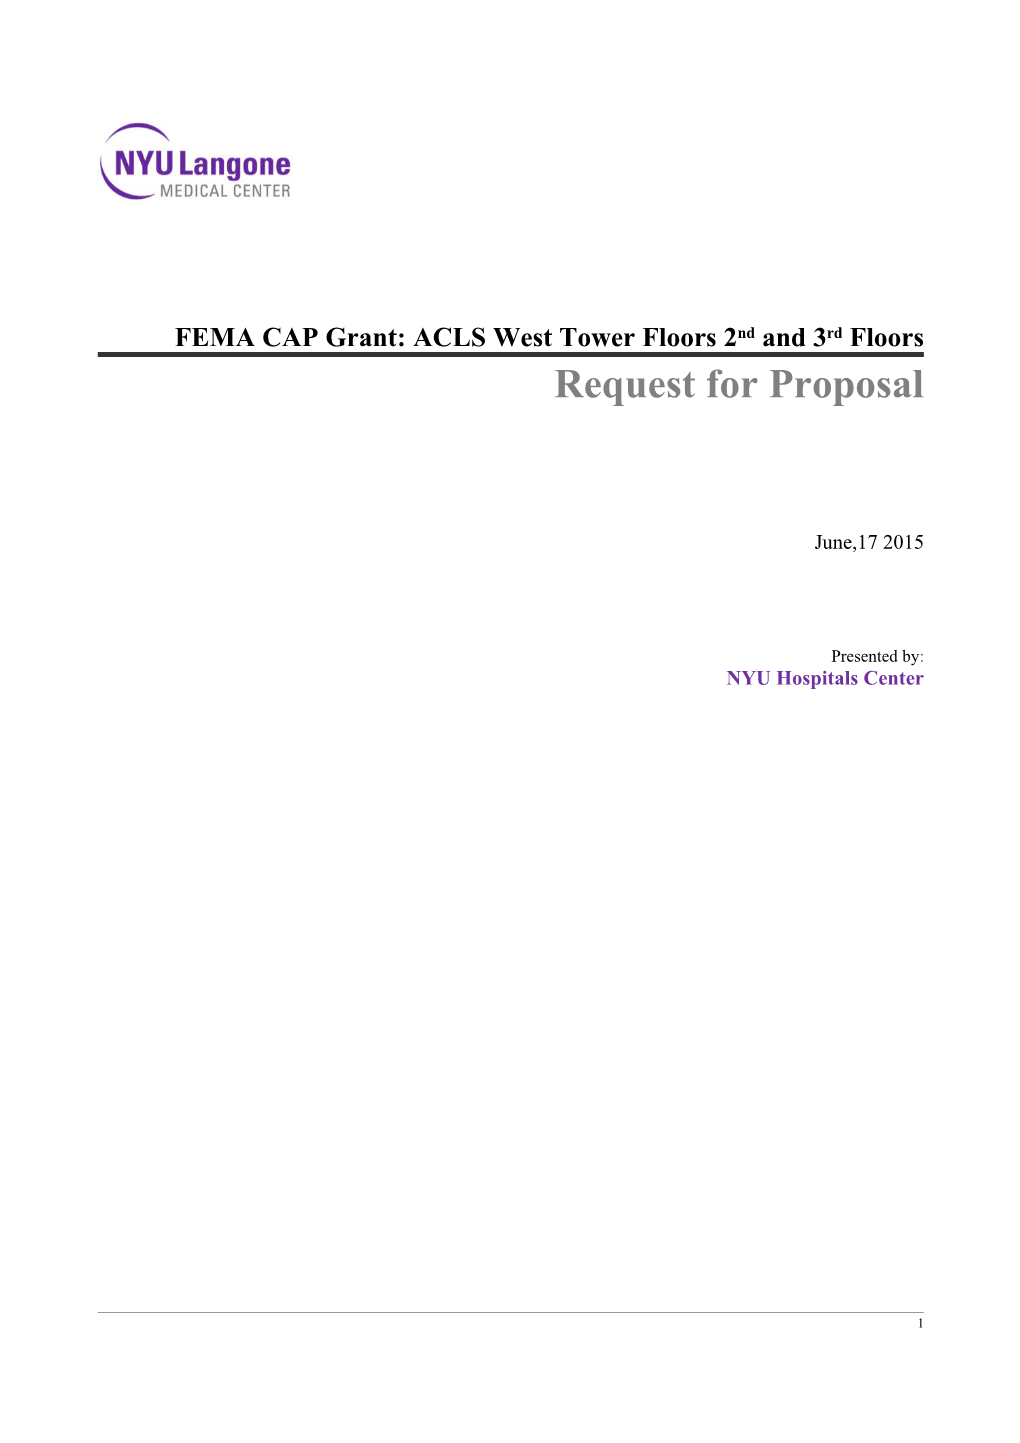 Example of RFP s1